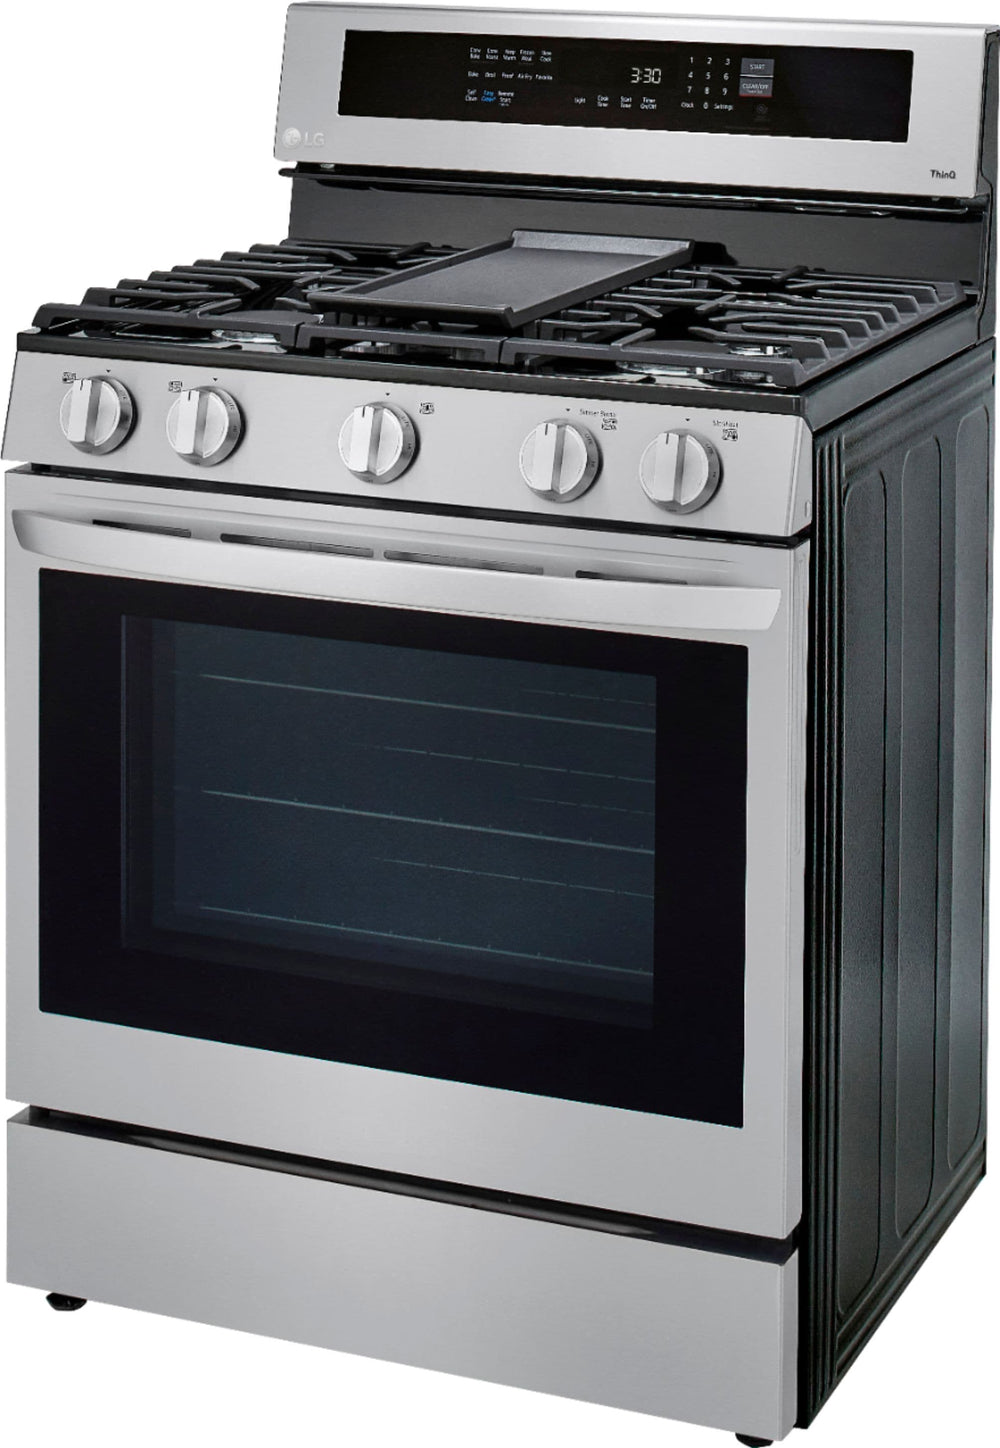 LG - 5.8 Cu. Ft. Freestanding Gas True Convection Range with EasyClean, InstaView and AirFry - Stainless steel_1